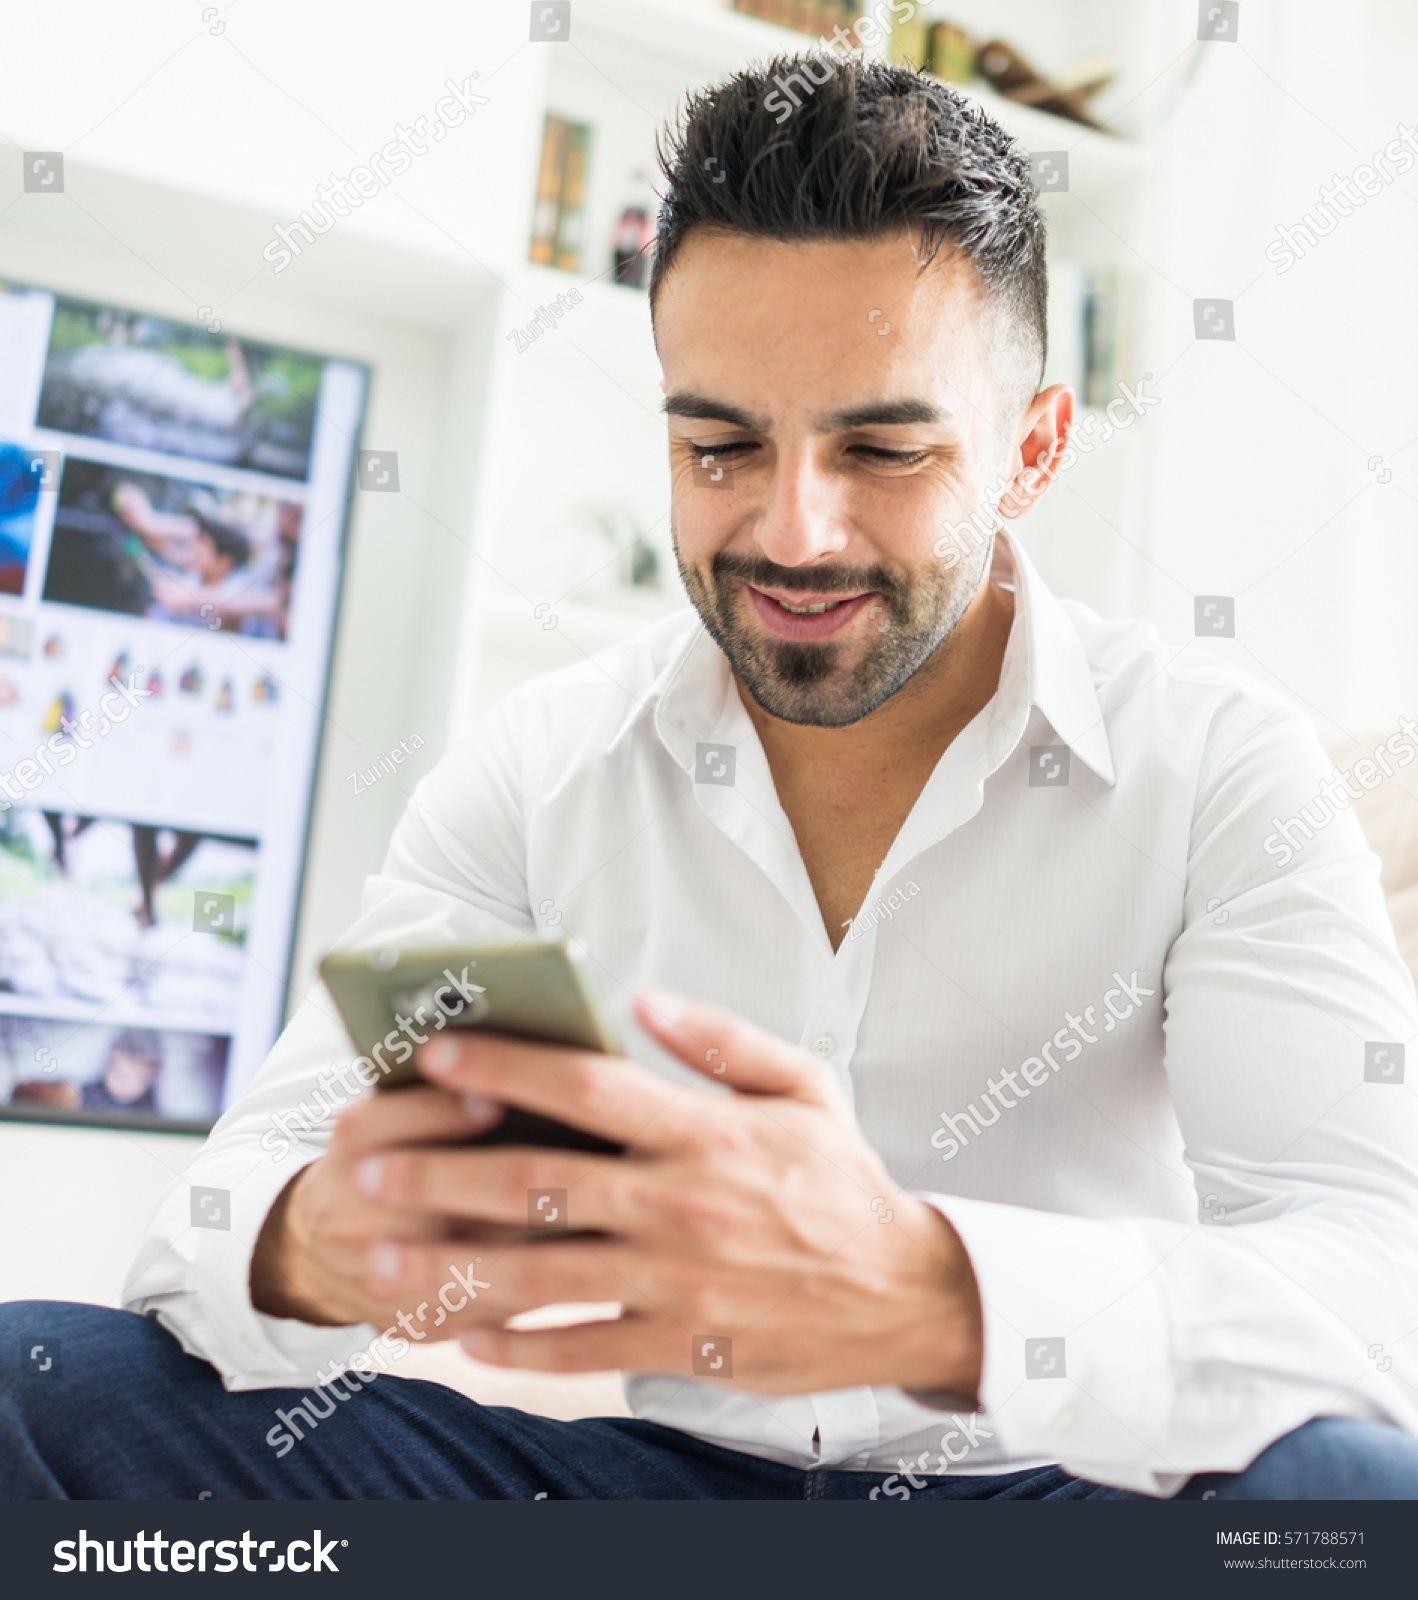 Young Good Looking Man Home Using Stock Photo 571788571 - Shutterstock